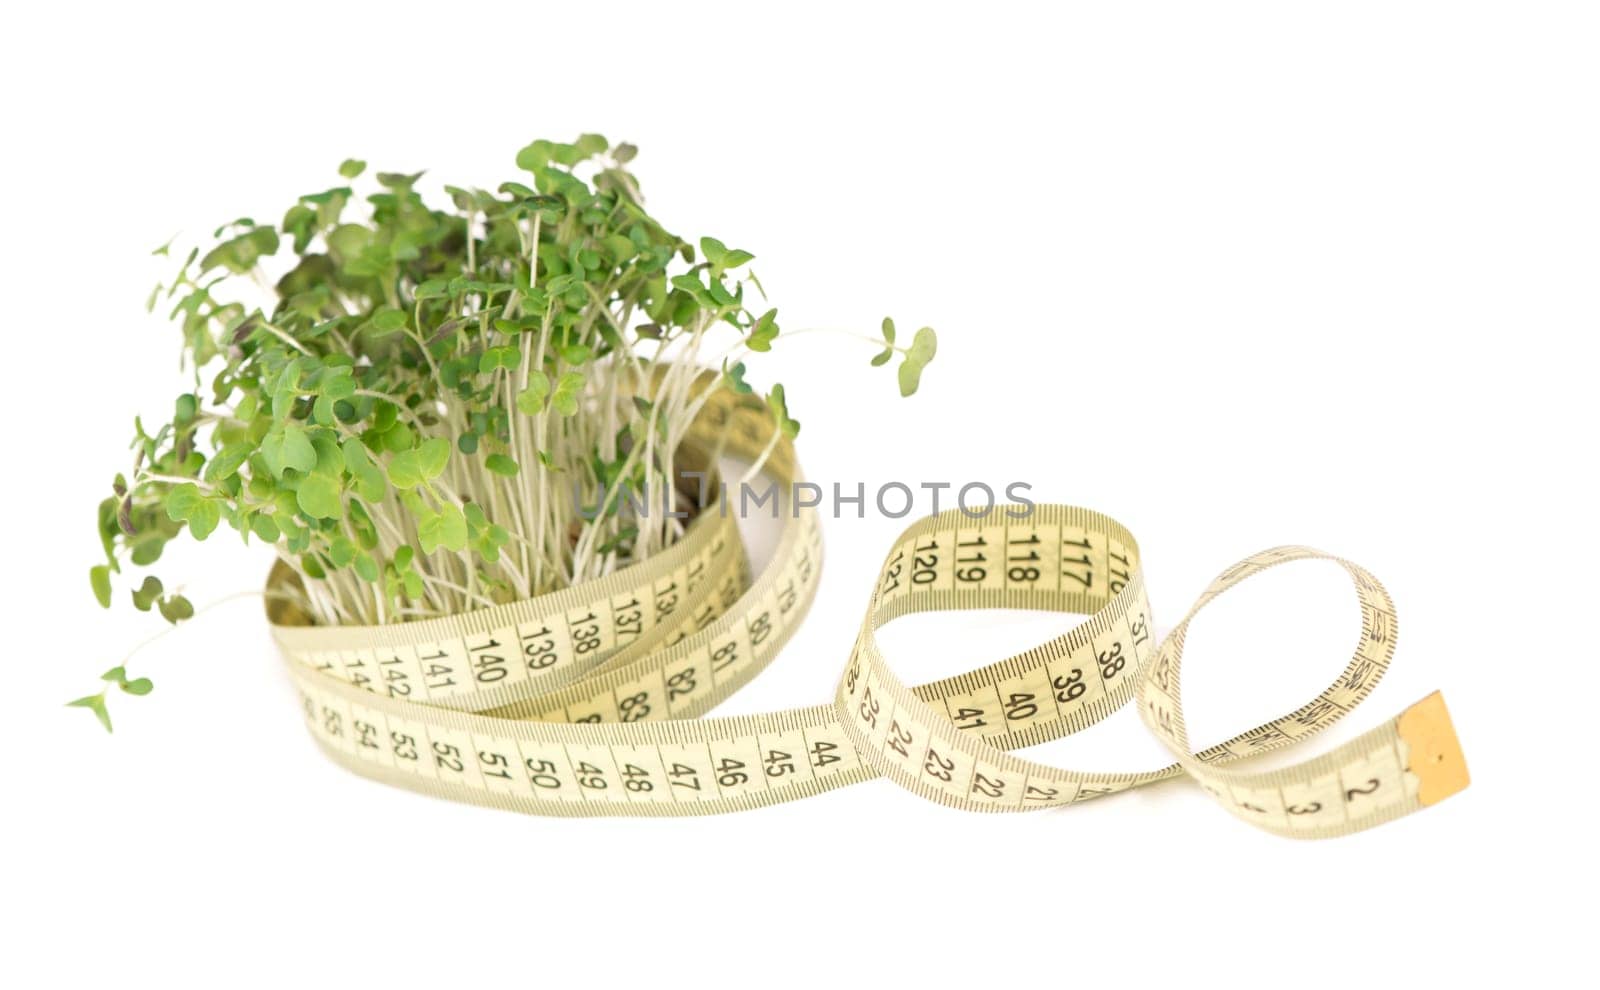 Healthy food concept, growing greenery, small business. Mustard microgreens, super food. A bunch of mustard greens is wrapped in a yellow centimeter tape. Microgreens promote weight loss, diet, balanced nutrition by aprilphoto